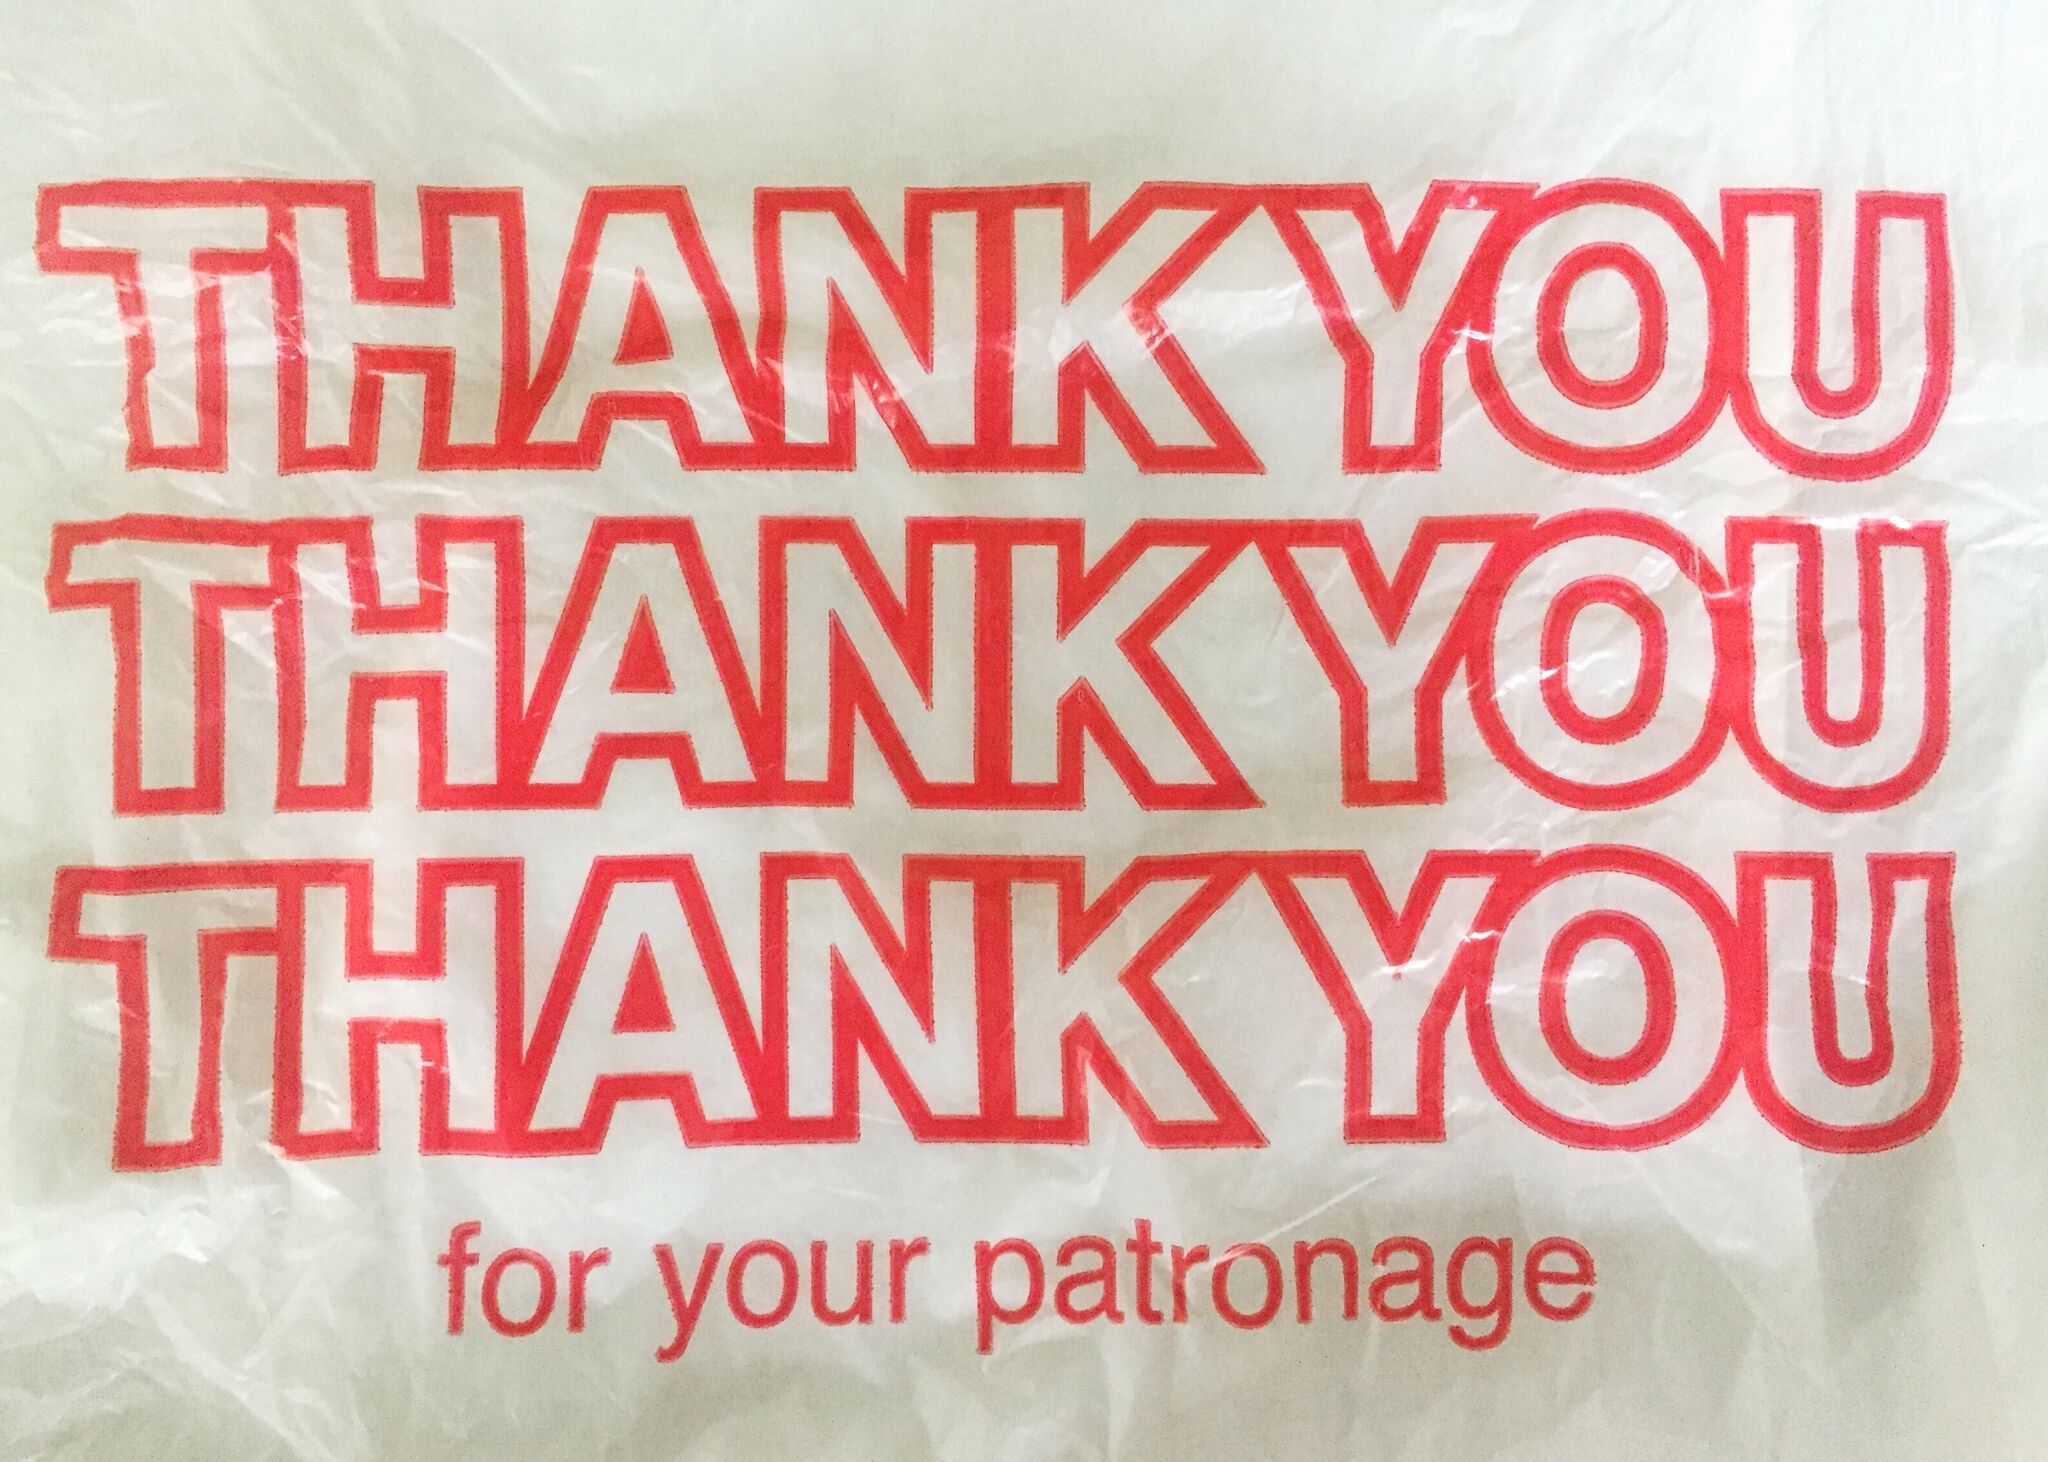 Photo of a plastic bag that says "THANK YOU for your patronage"